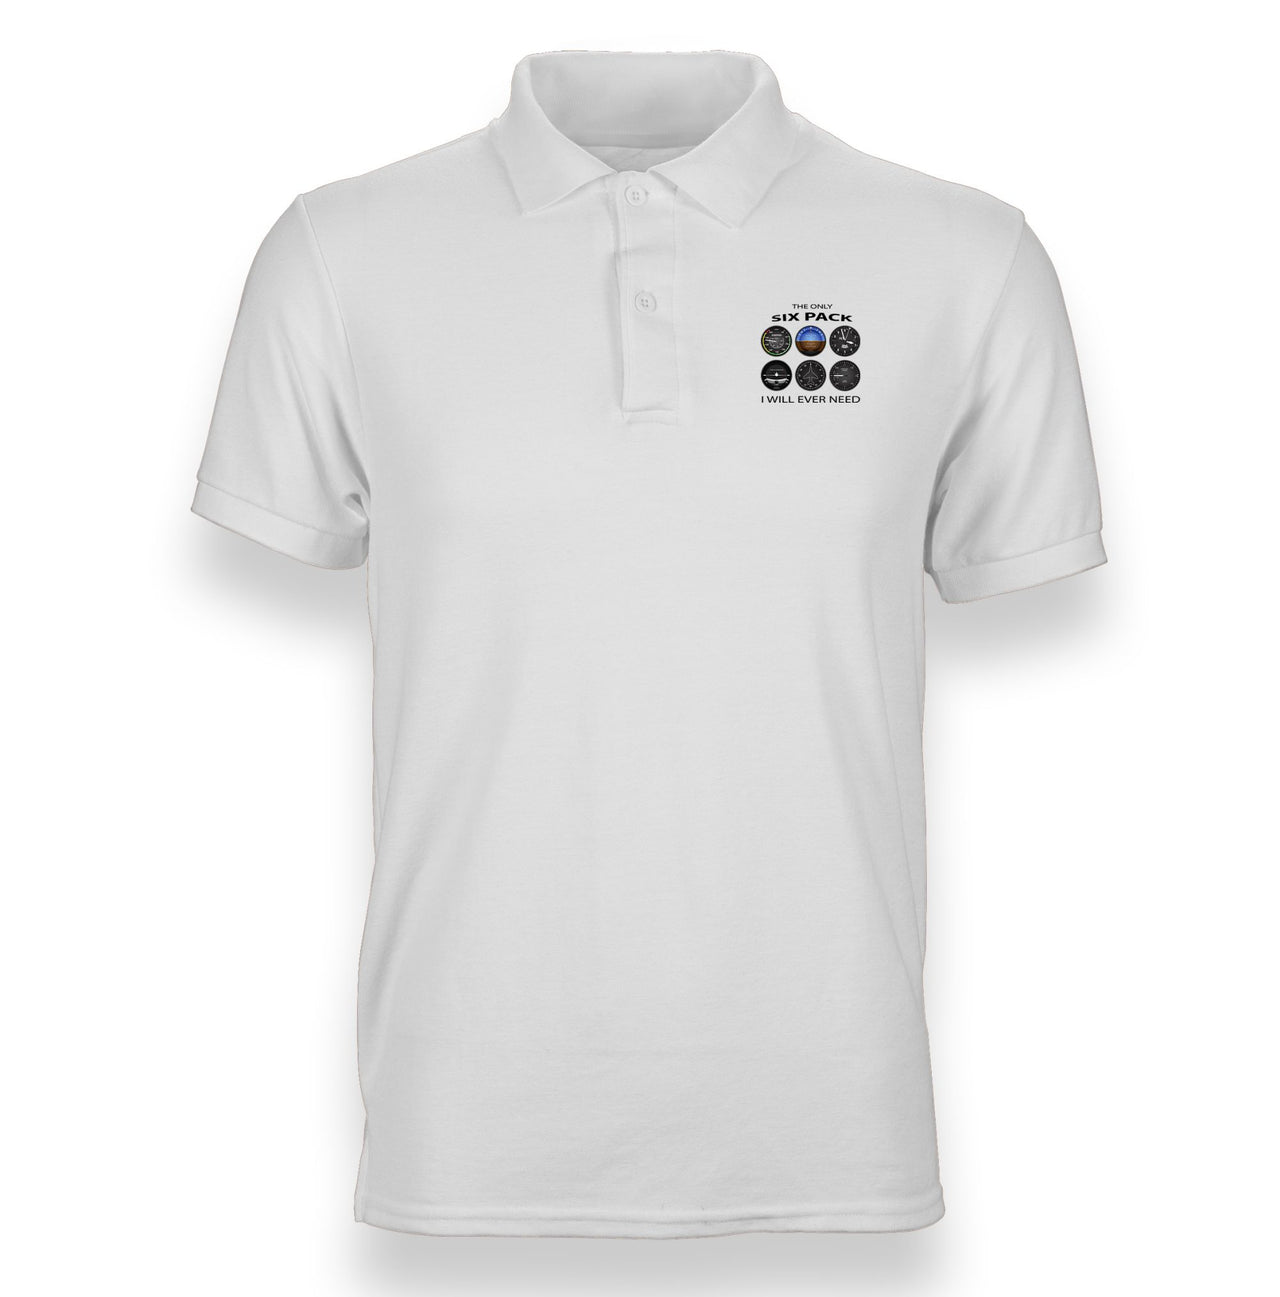 The Only Six Pack I Will Ever Need Designed "WOMEN" Polo T-Shirts